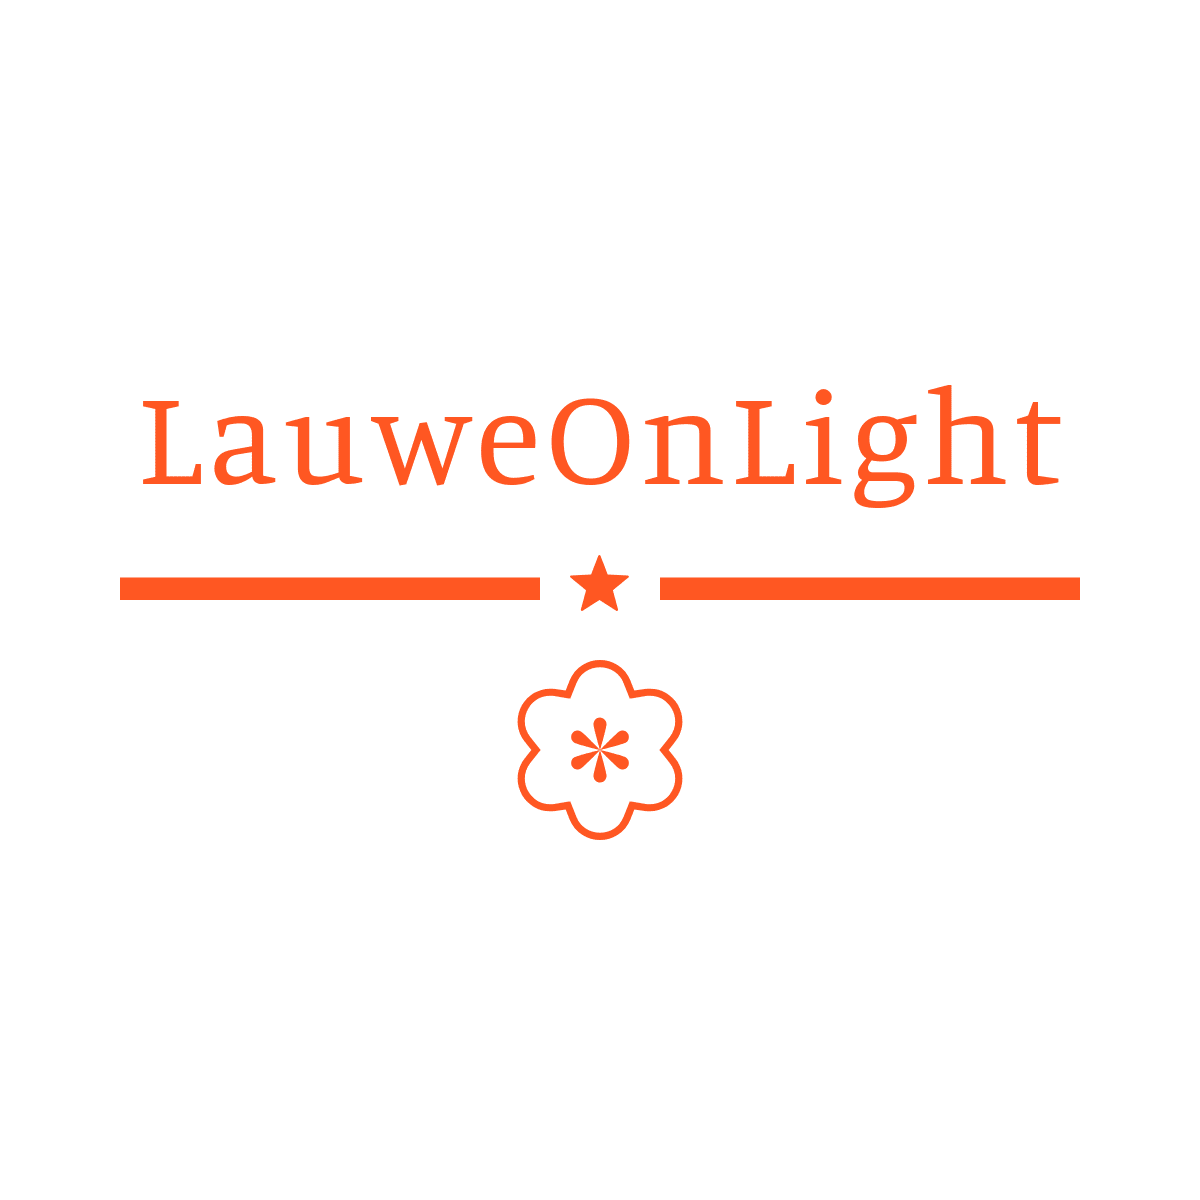 Today on Lauwe on Light